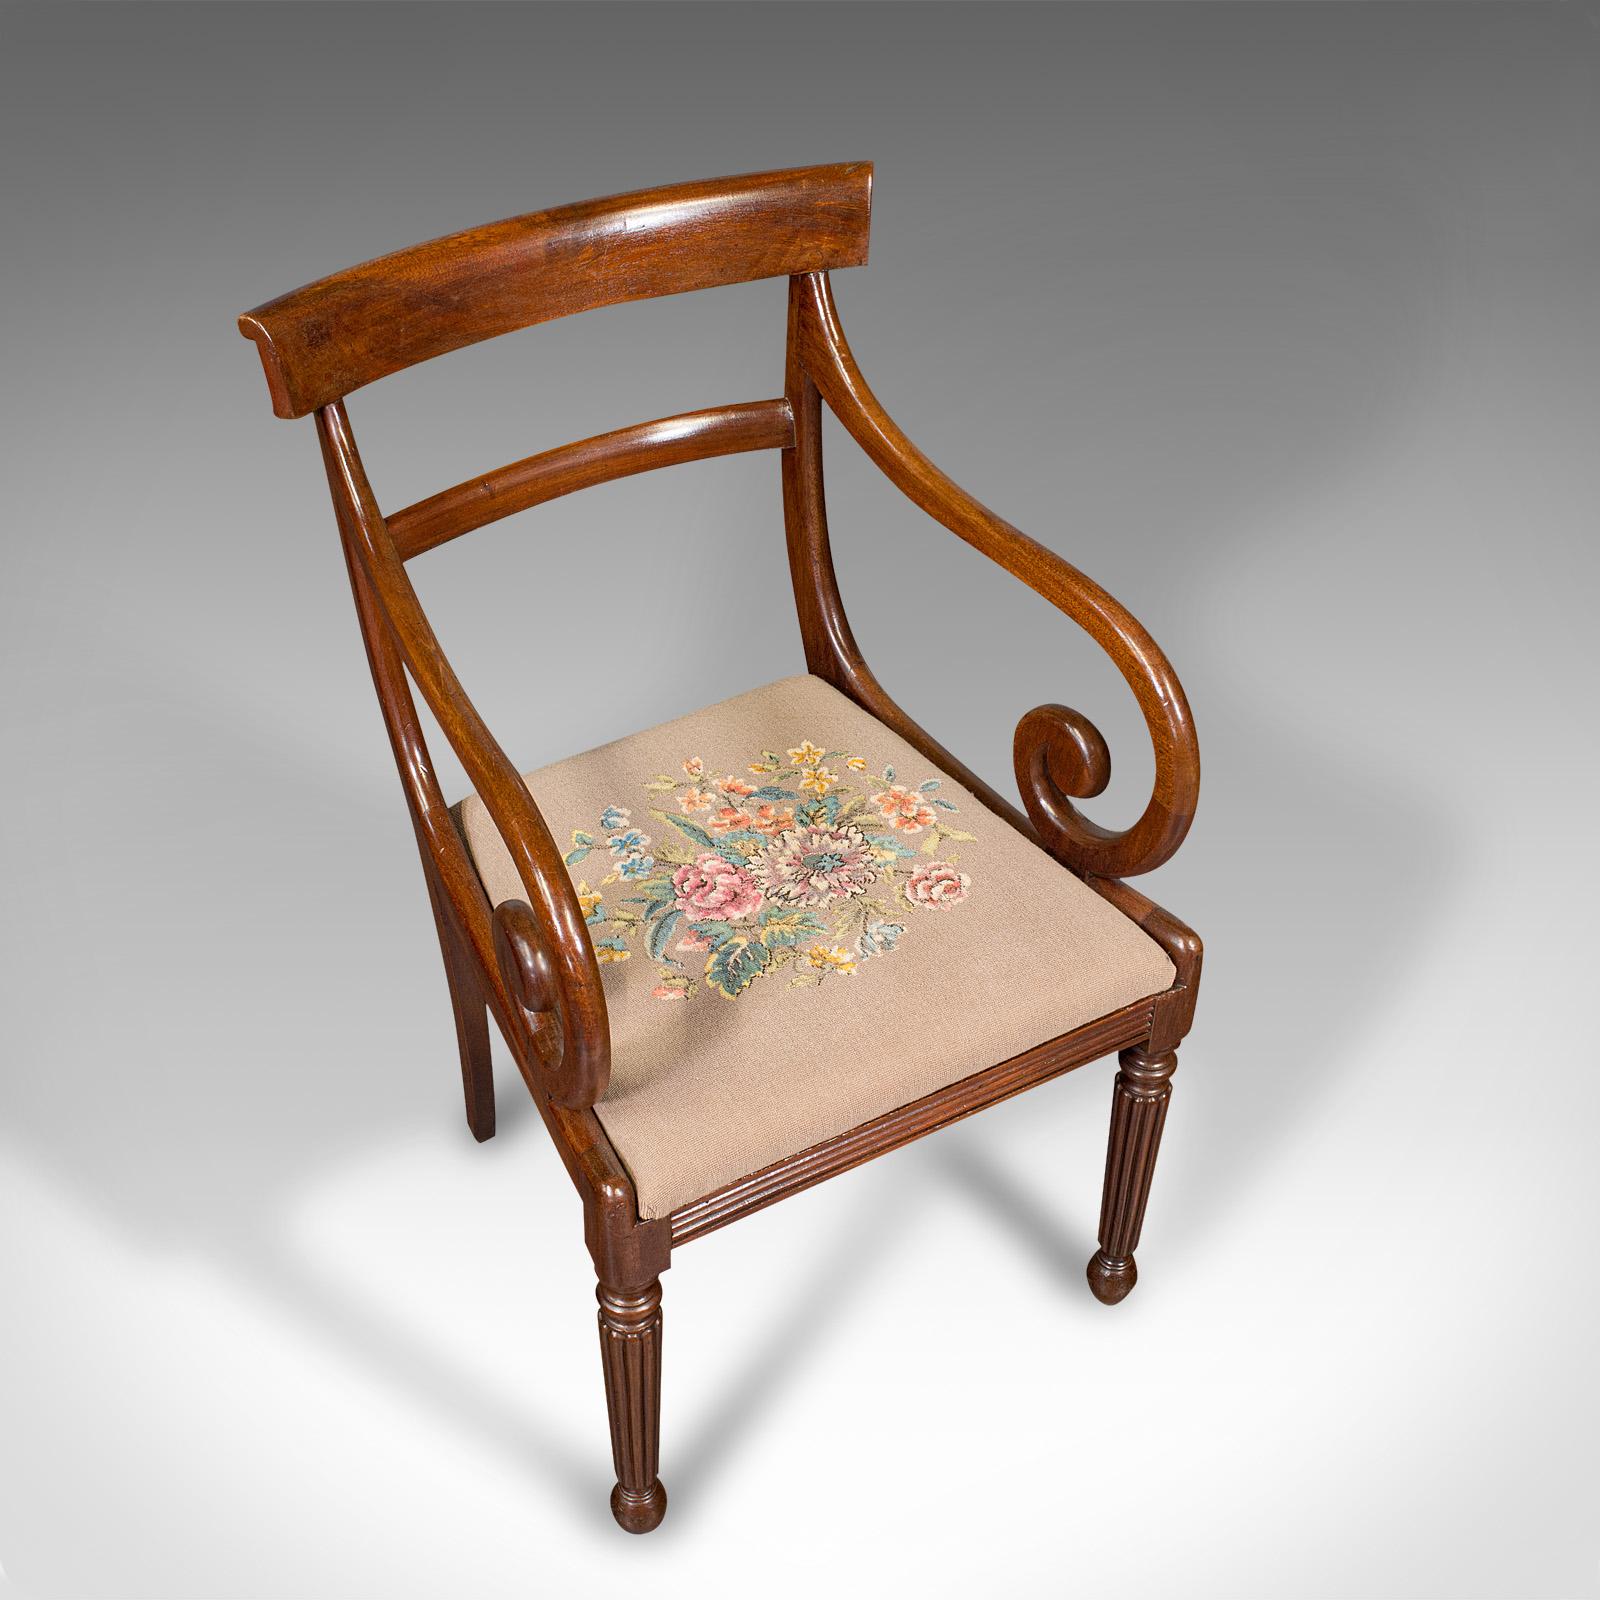 Wood Antique Elbow Chair, English, Armchair, Needlepoint, Drop In Seat, Late Georgian For Sale